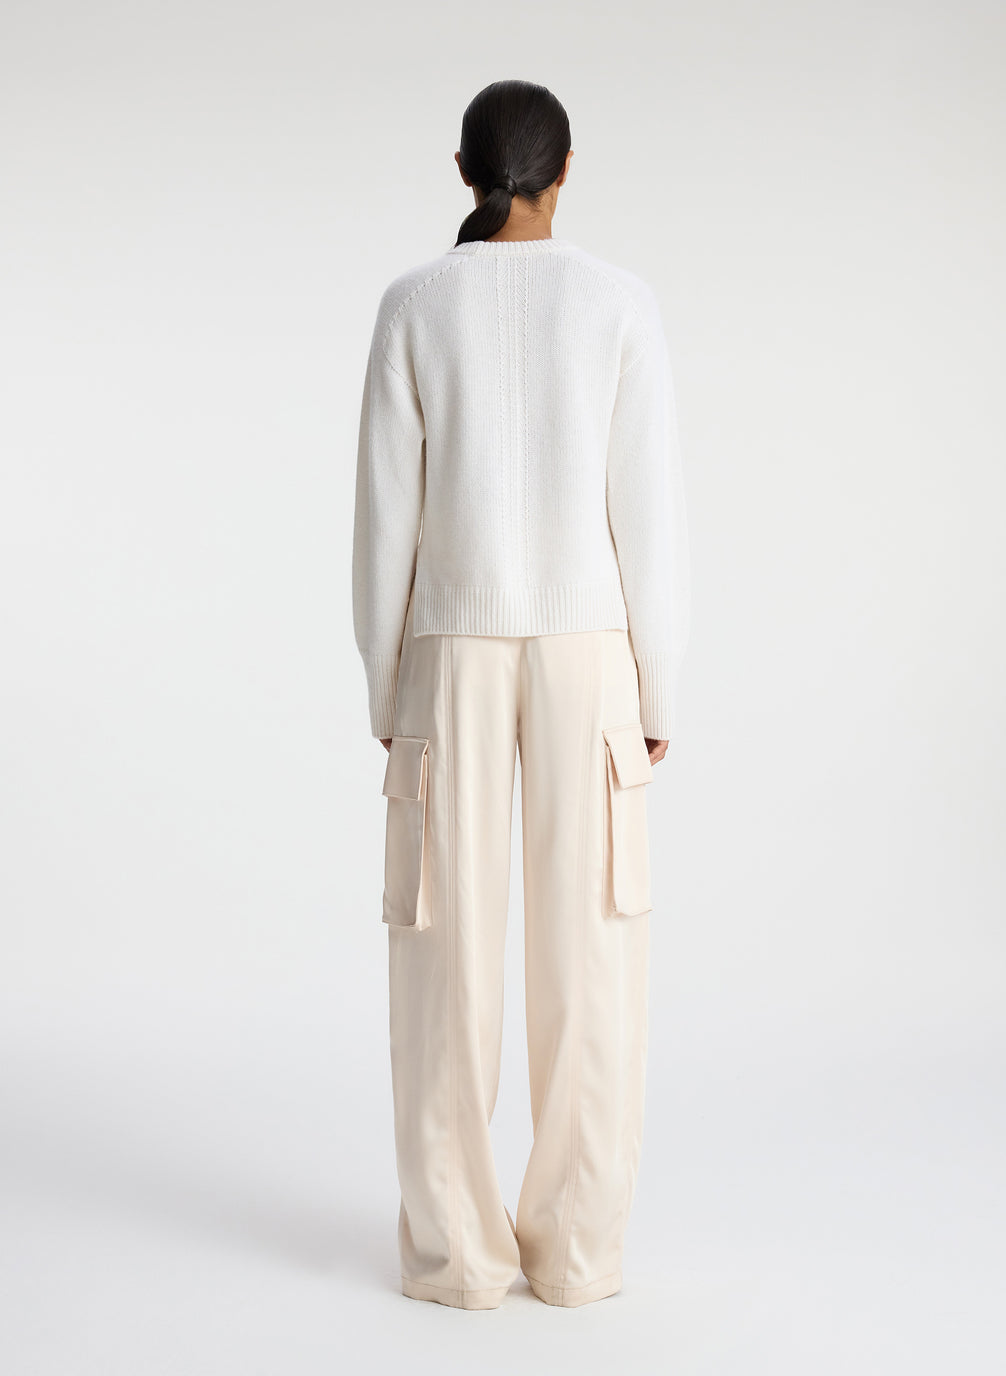 back view of woman wearing white sweater and beige satin cargo pants